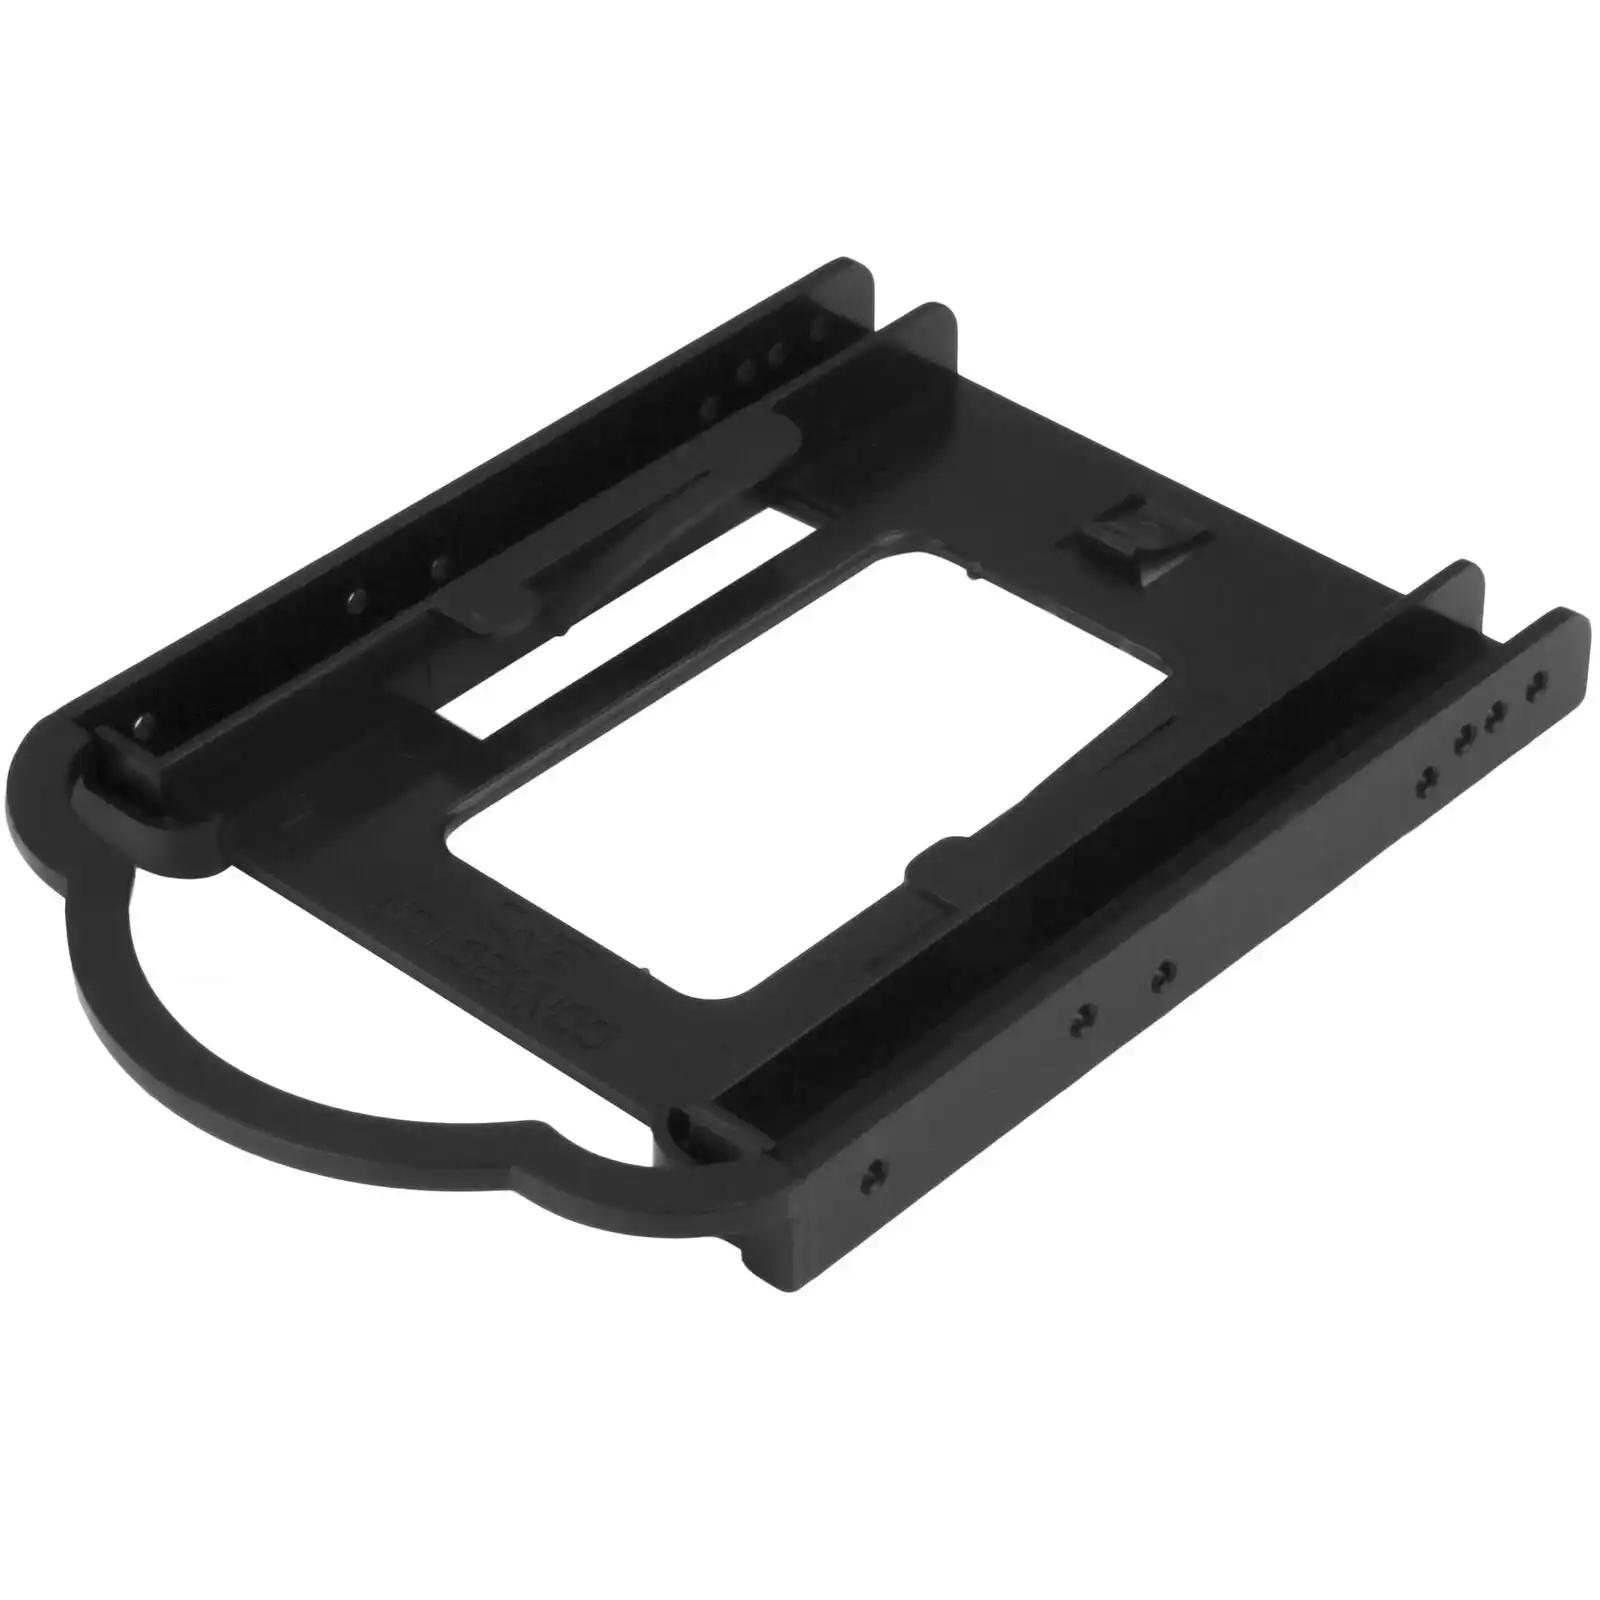 Star Tech 2.5" SSD/HDD to 3.5" Bay Mounting Bracket for H 7mm/9.5mm Hard Drive